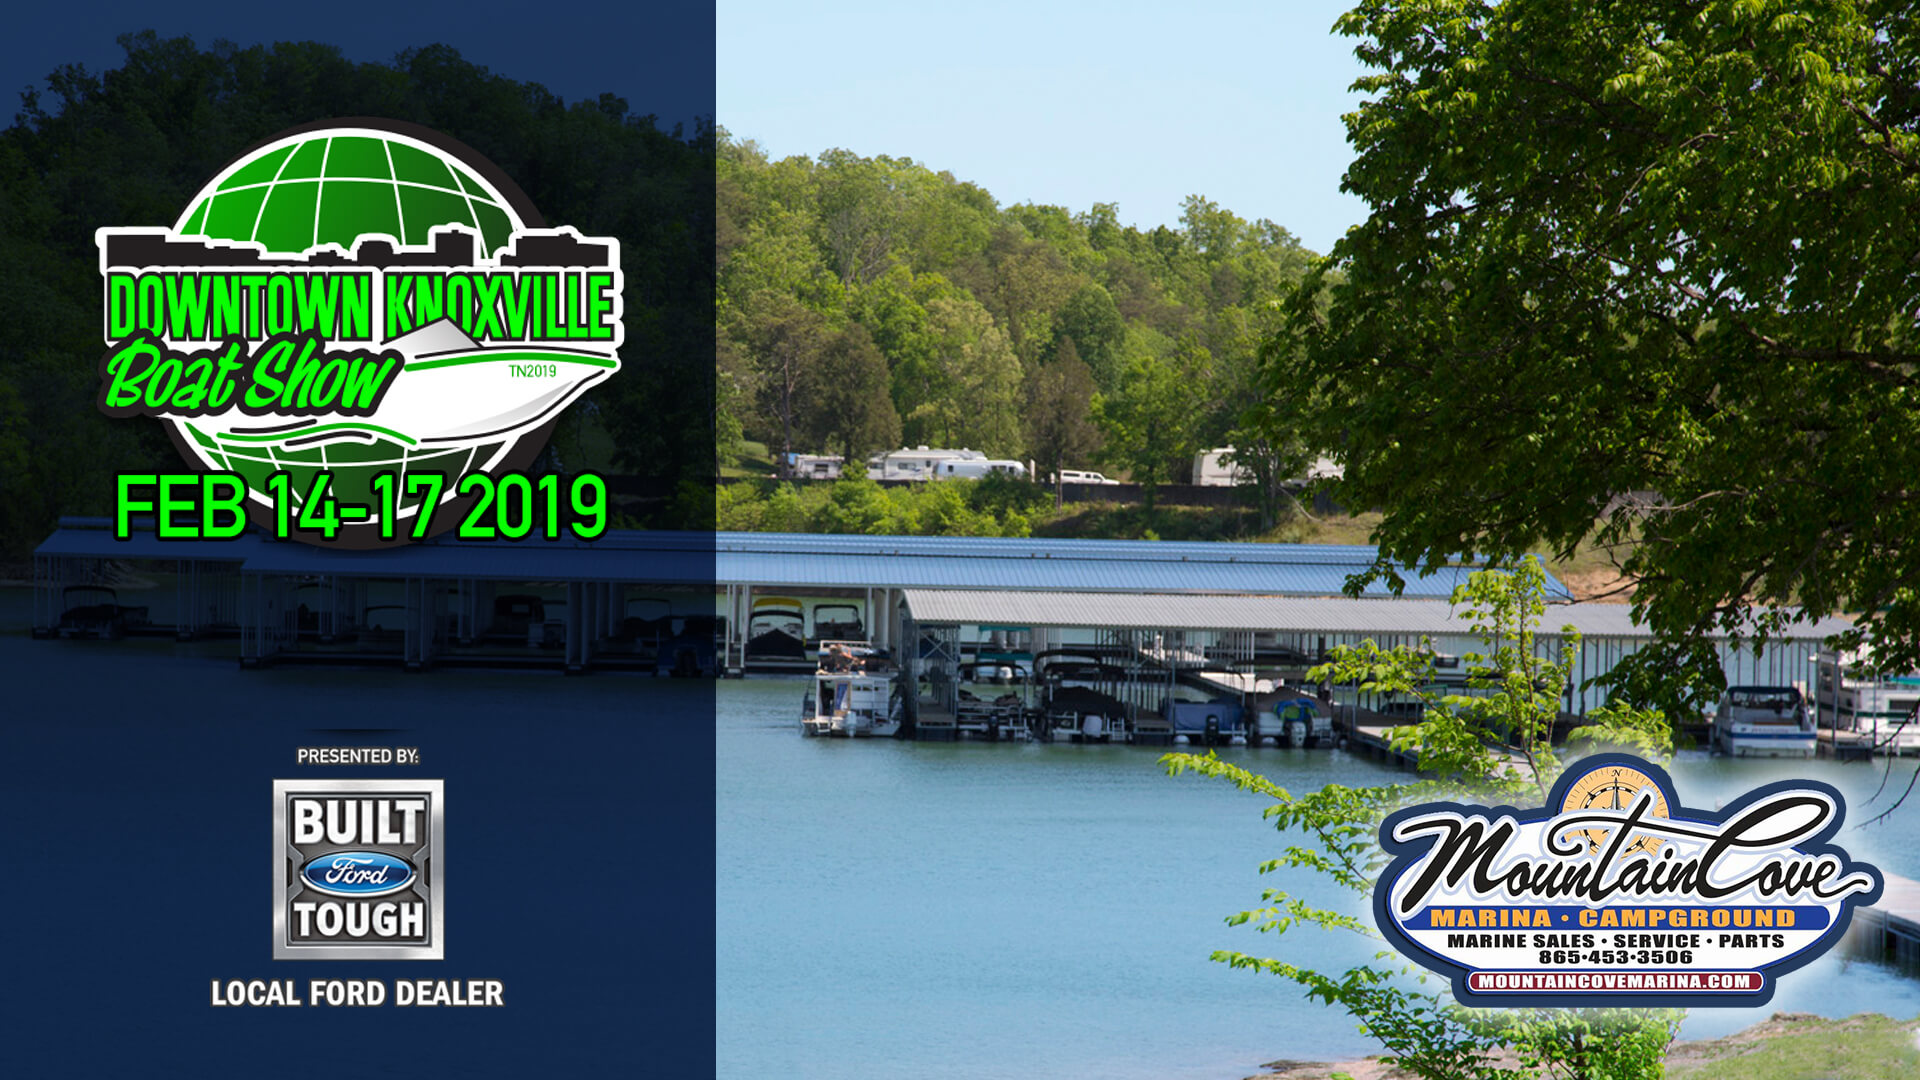 2019 Downtown Knoxville Boat Show